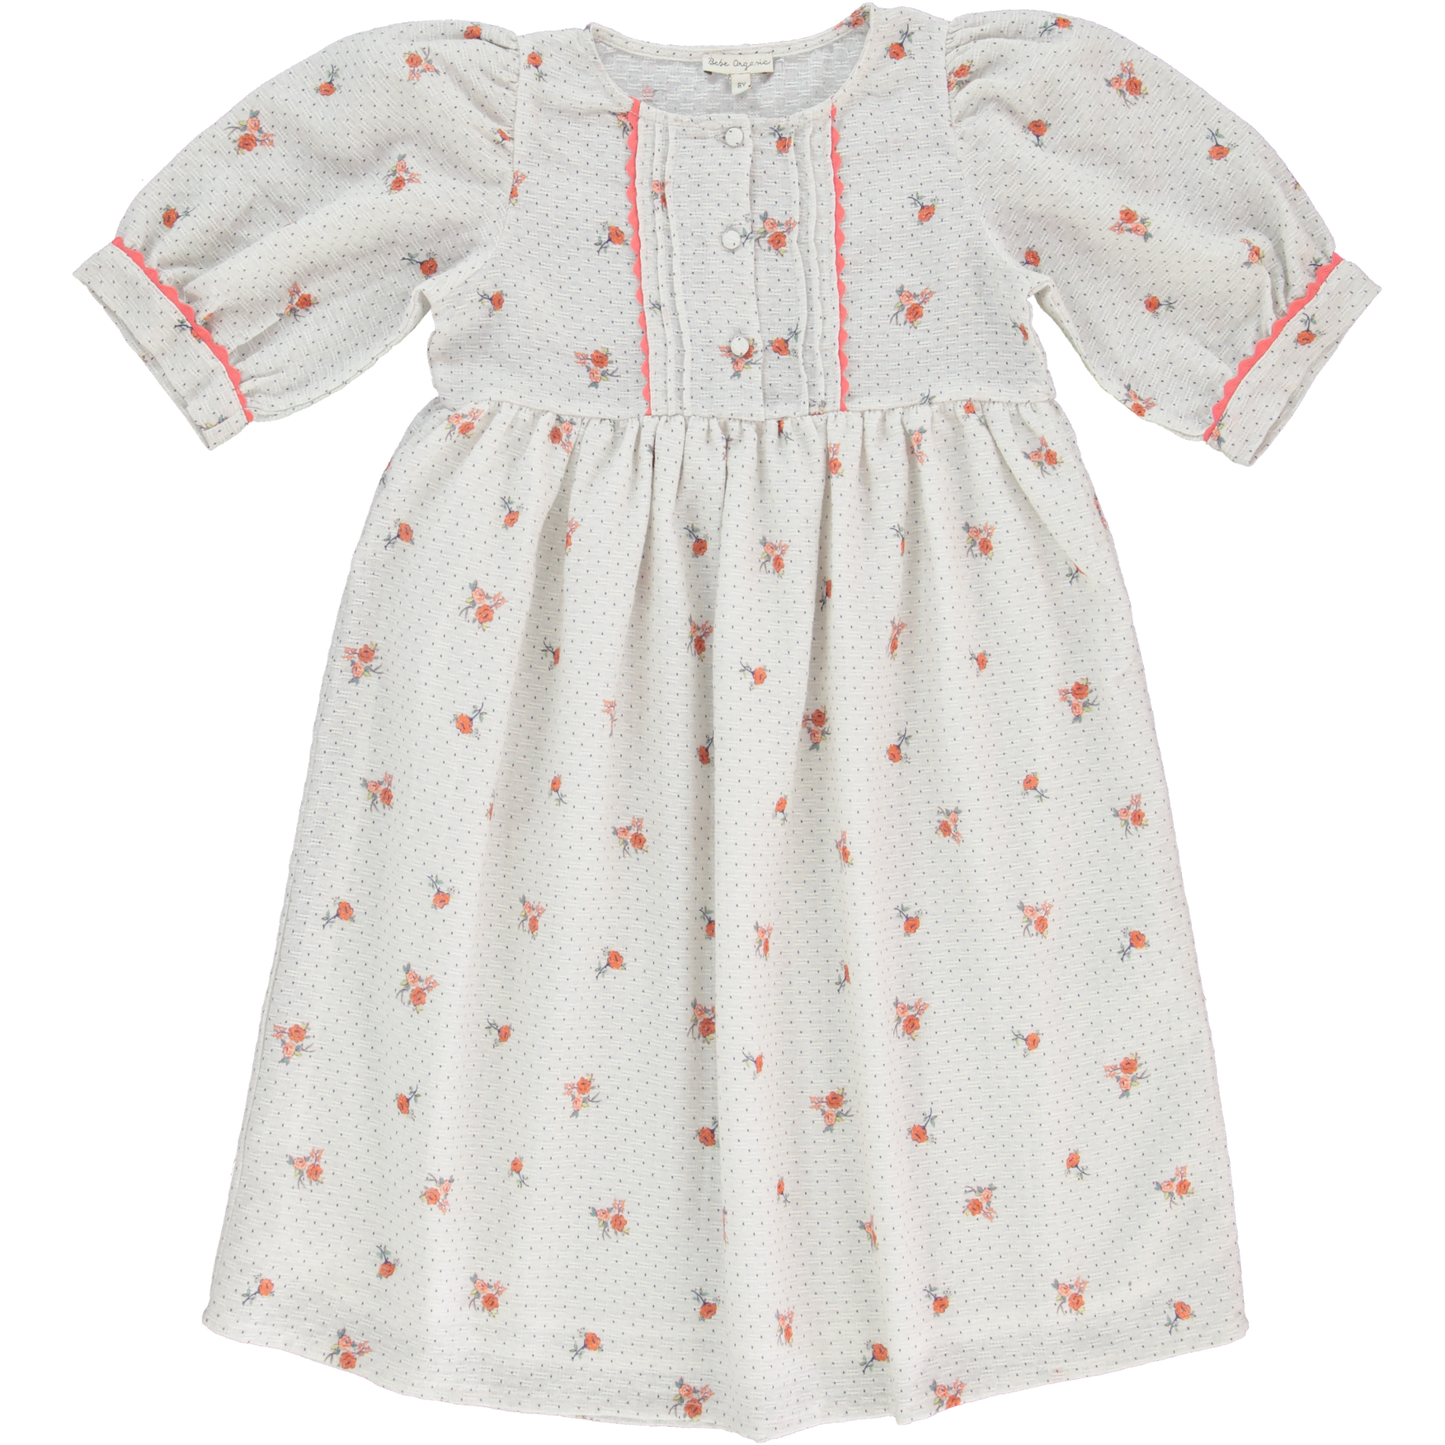 BEBE ORGANIC MISTY WHITE FLORAL DOTTED DRESS [FINAL SALE]